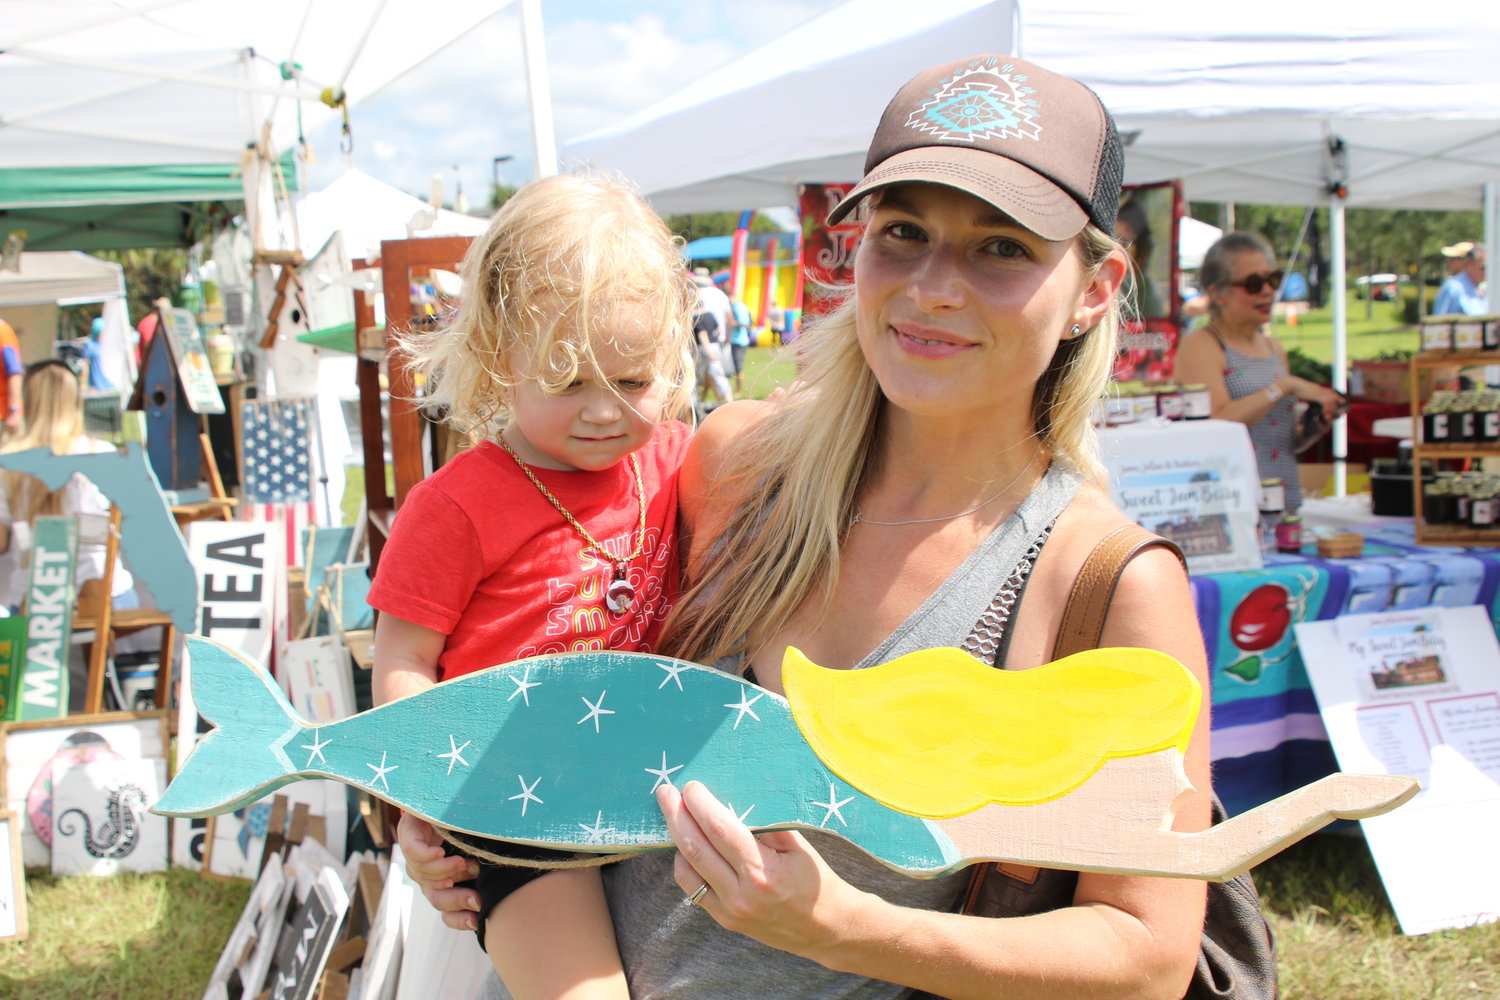 Jordan Gamber holds daughter Ali and shows off mermaid art she purchased at the market.